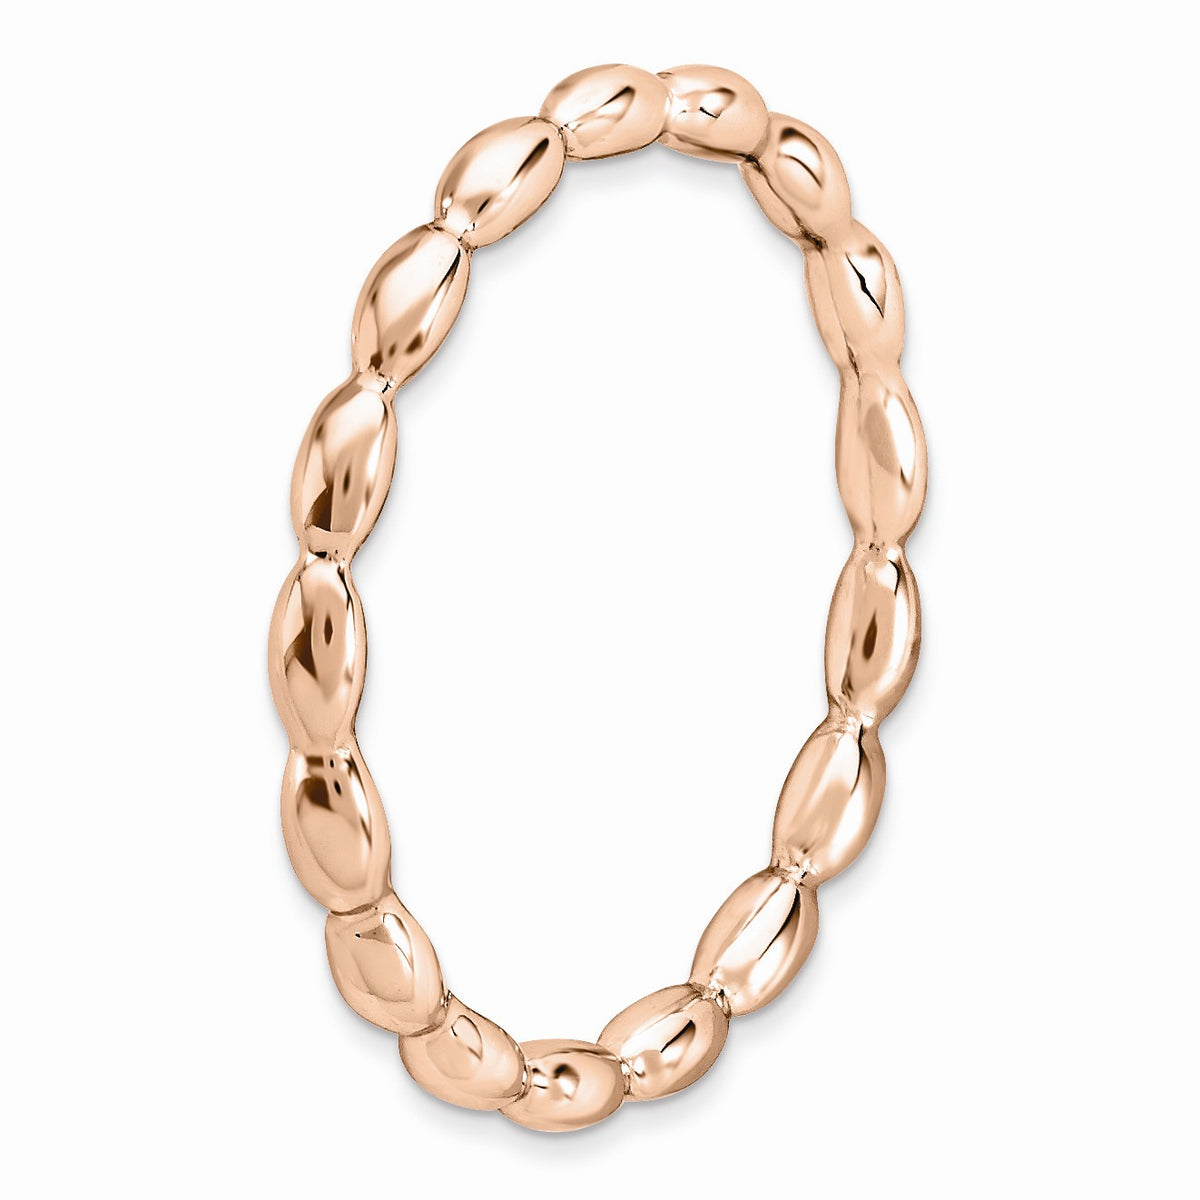 Alternate view of the 2.25mm 14k Rose Gold Plated Sterling Silver Stackable Rice Bead Band by The Black Bow Jewelry Co.